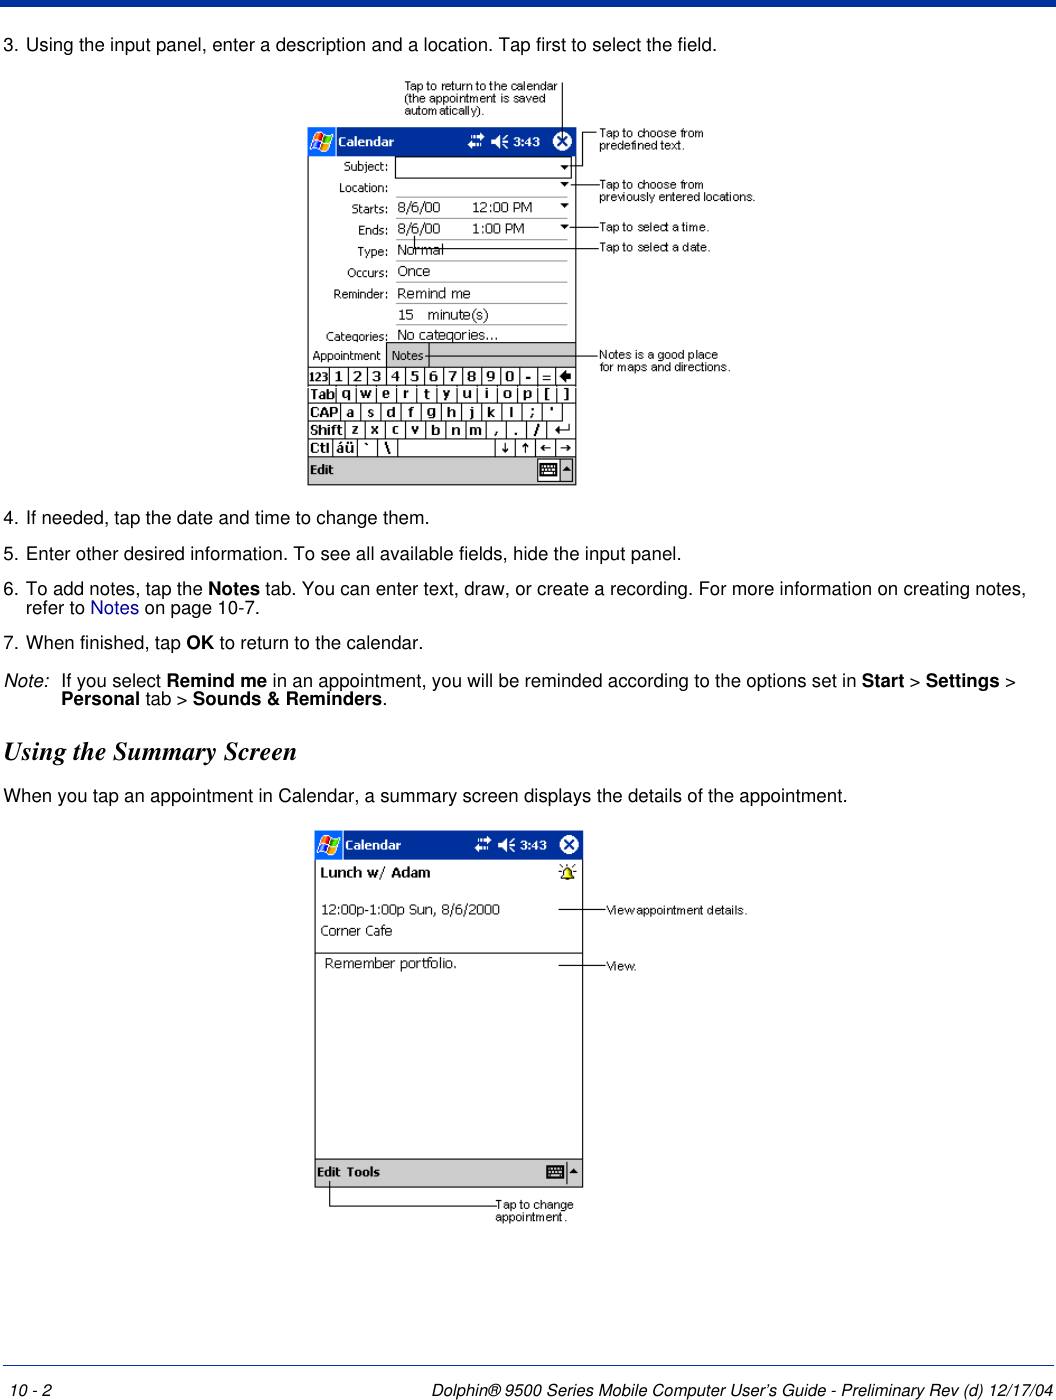 10 - 2 Dolphin® 9500 Series Mobile Computer User’s Guide - Preliminary Rev (d) 12/17/043. Using the input panel, enter a description and a location. Tap first to select the field. 4. If needed, tap the date and time to change them.5. Enter other desired information. To see all available fields, hide the input panel.6. To add notes, tap the Notes tab. You can enter text, draw, or create a recording. For more information on creating notes, refer to Notes on page 10-7.7. When finished, tap OK to return to the calendar. Note: If you select Remind me in an appointment, you will be reminded according to the options set in Start &gt; Settings &gt; Personal tab &gt; Sounds &amp; Reminders. Using the Summary ScreenWhen you tap an appointment in Calendar, a summary screen displays the details of the appointment.